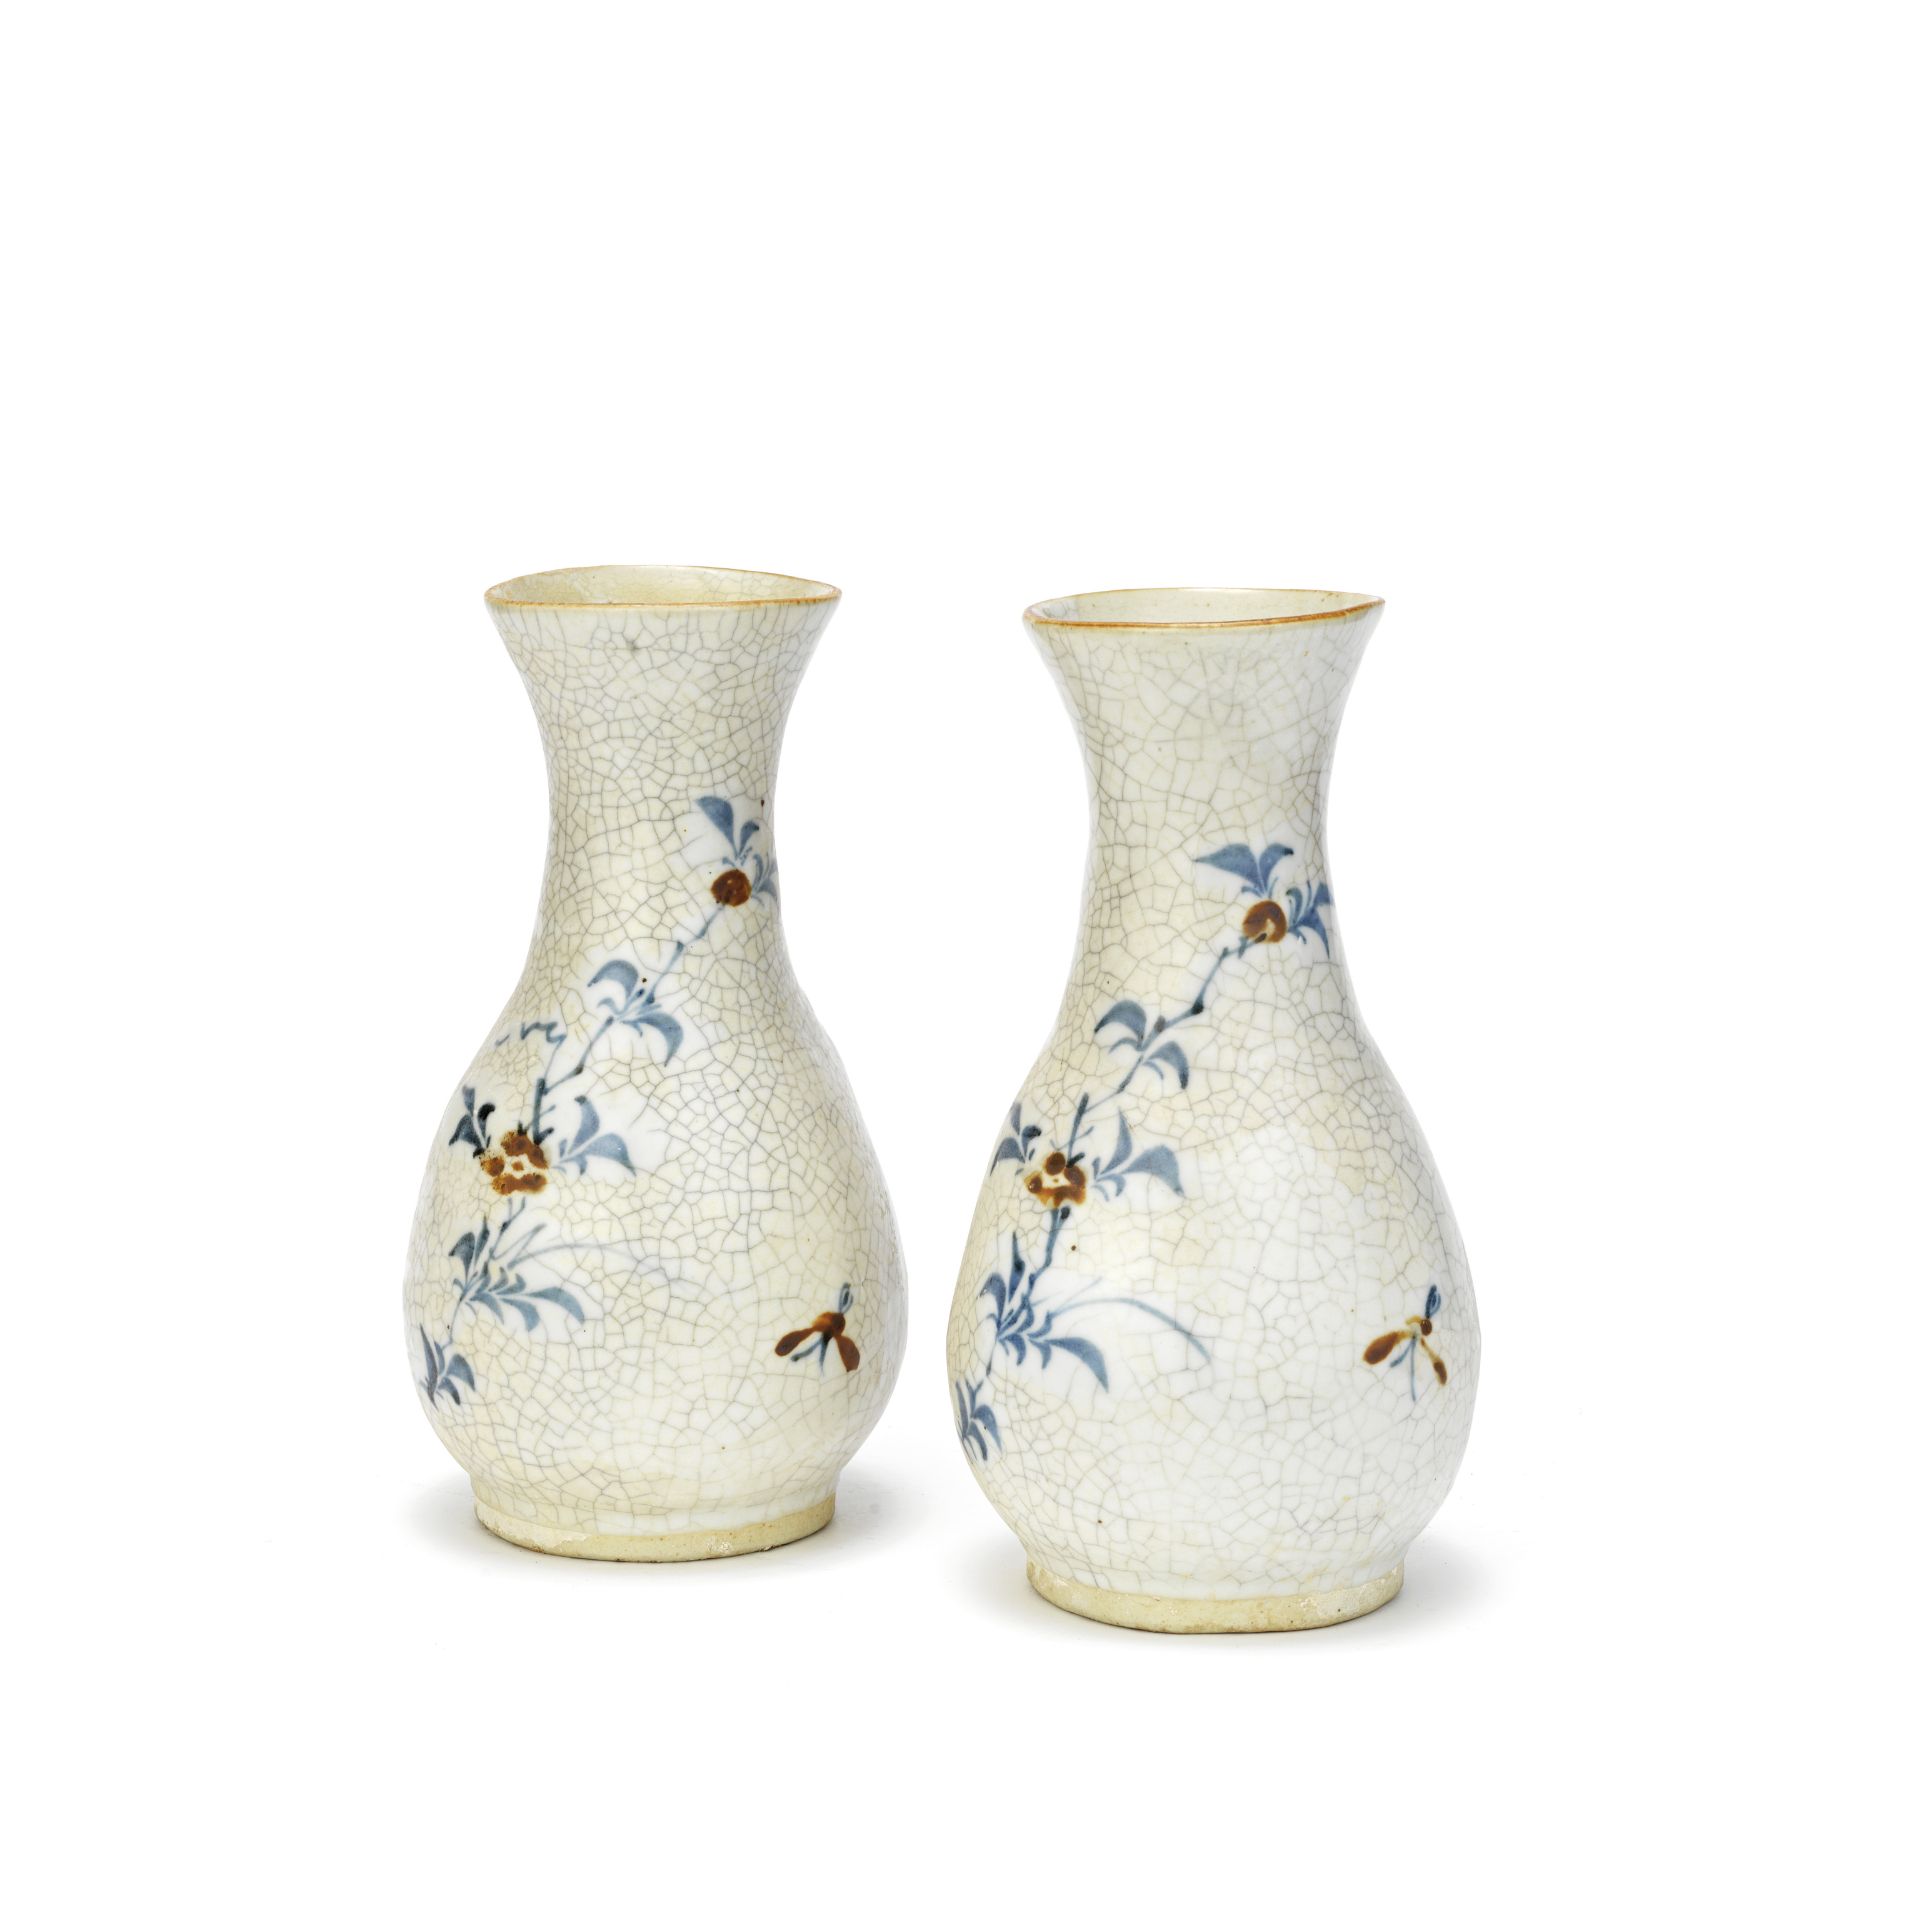 A PAIR OF UNDERGLAZE-BLUE AND RUSSET CRACKLE-GLAZED VASES Late Ming Dynasty (2)